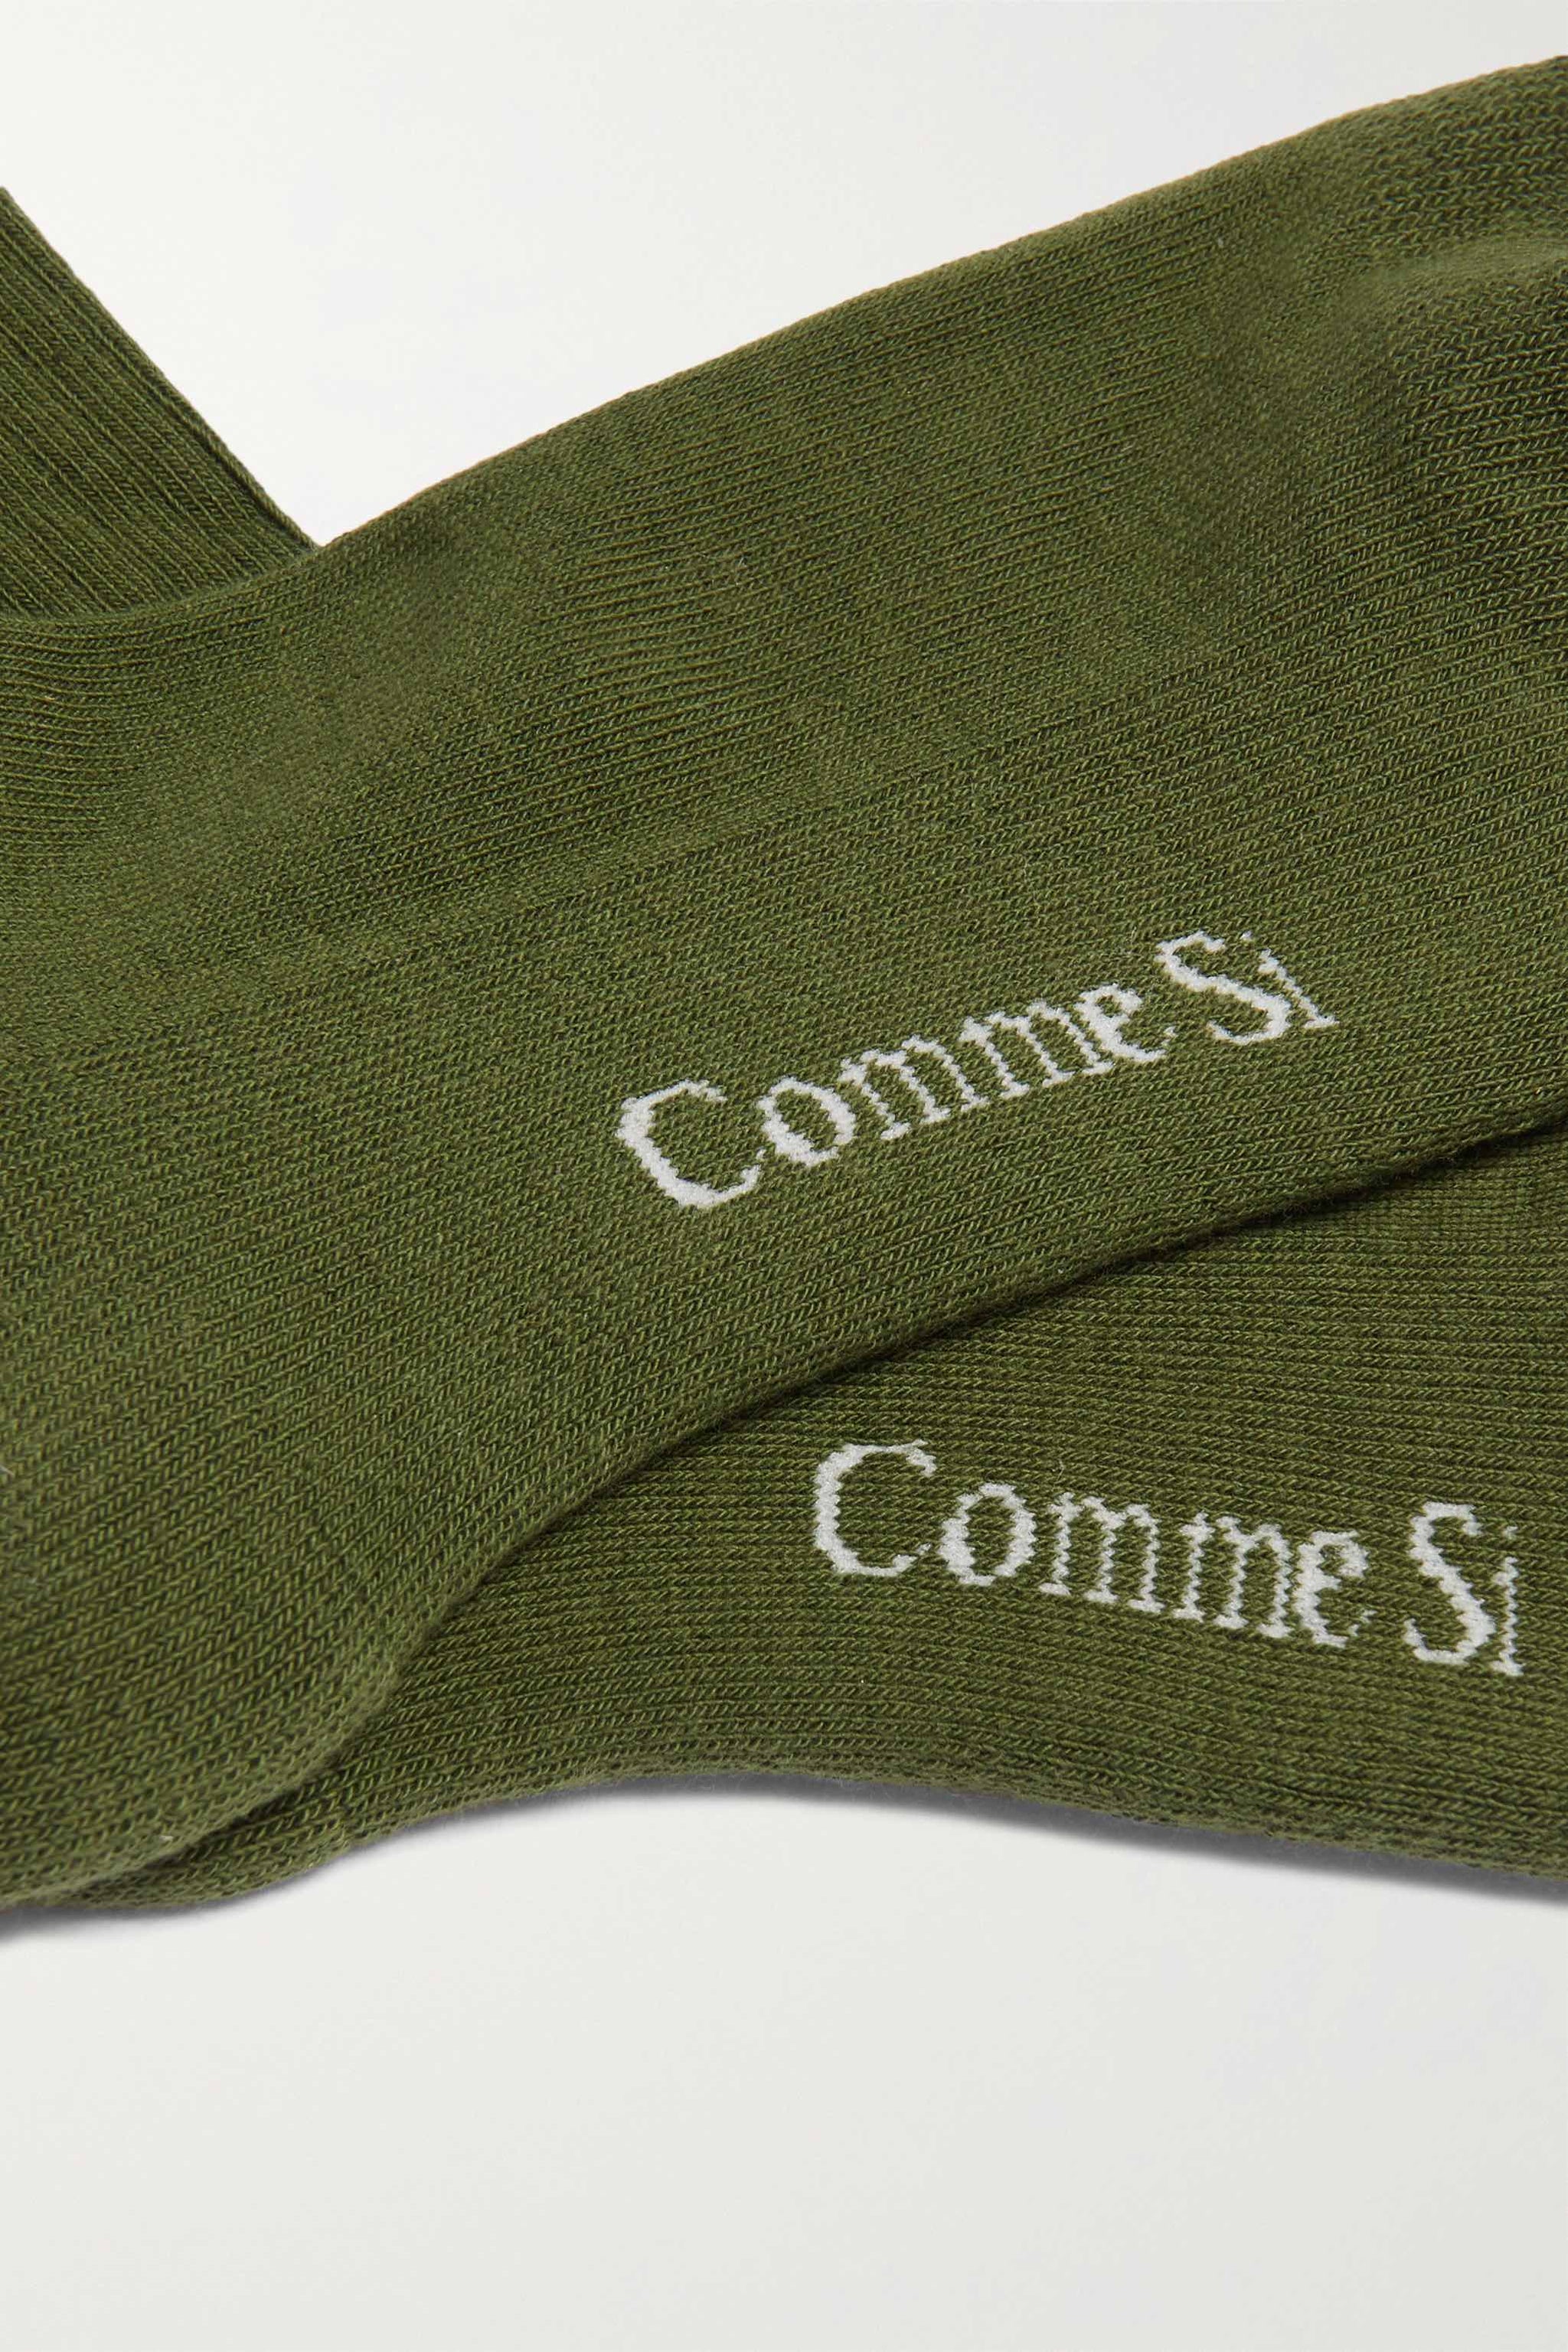 Footbed detail, The Everyday Sock in Olive, made with Organic Egyptian Cotton, by Comme Si